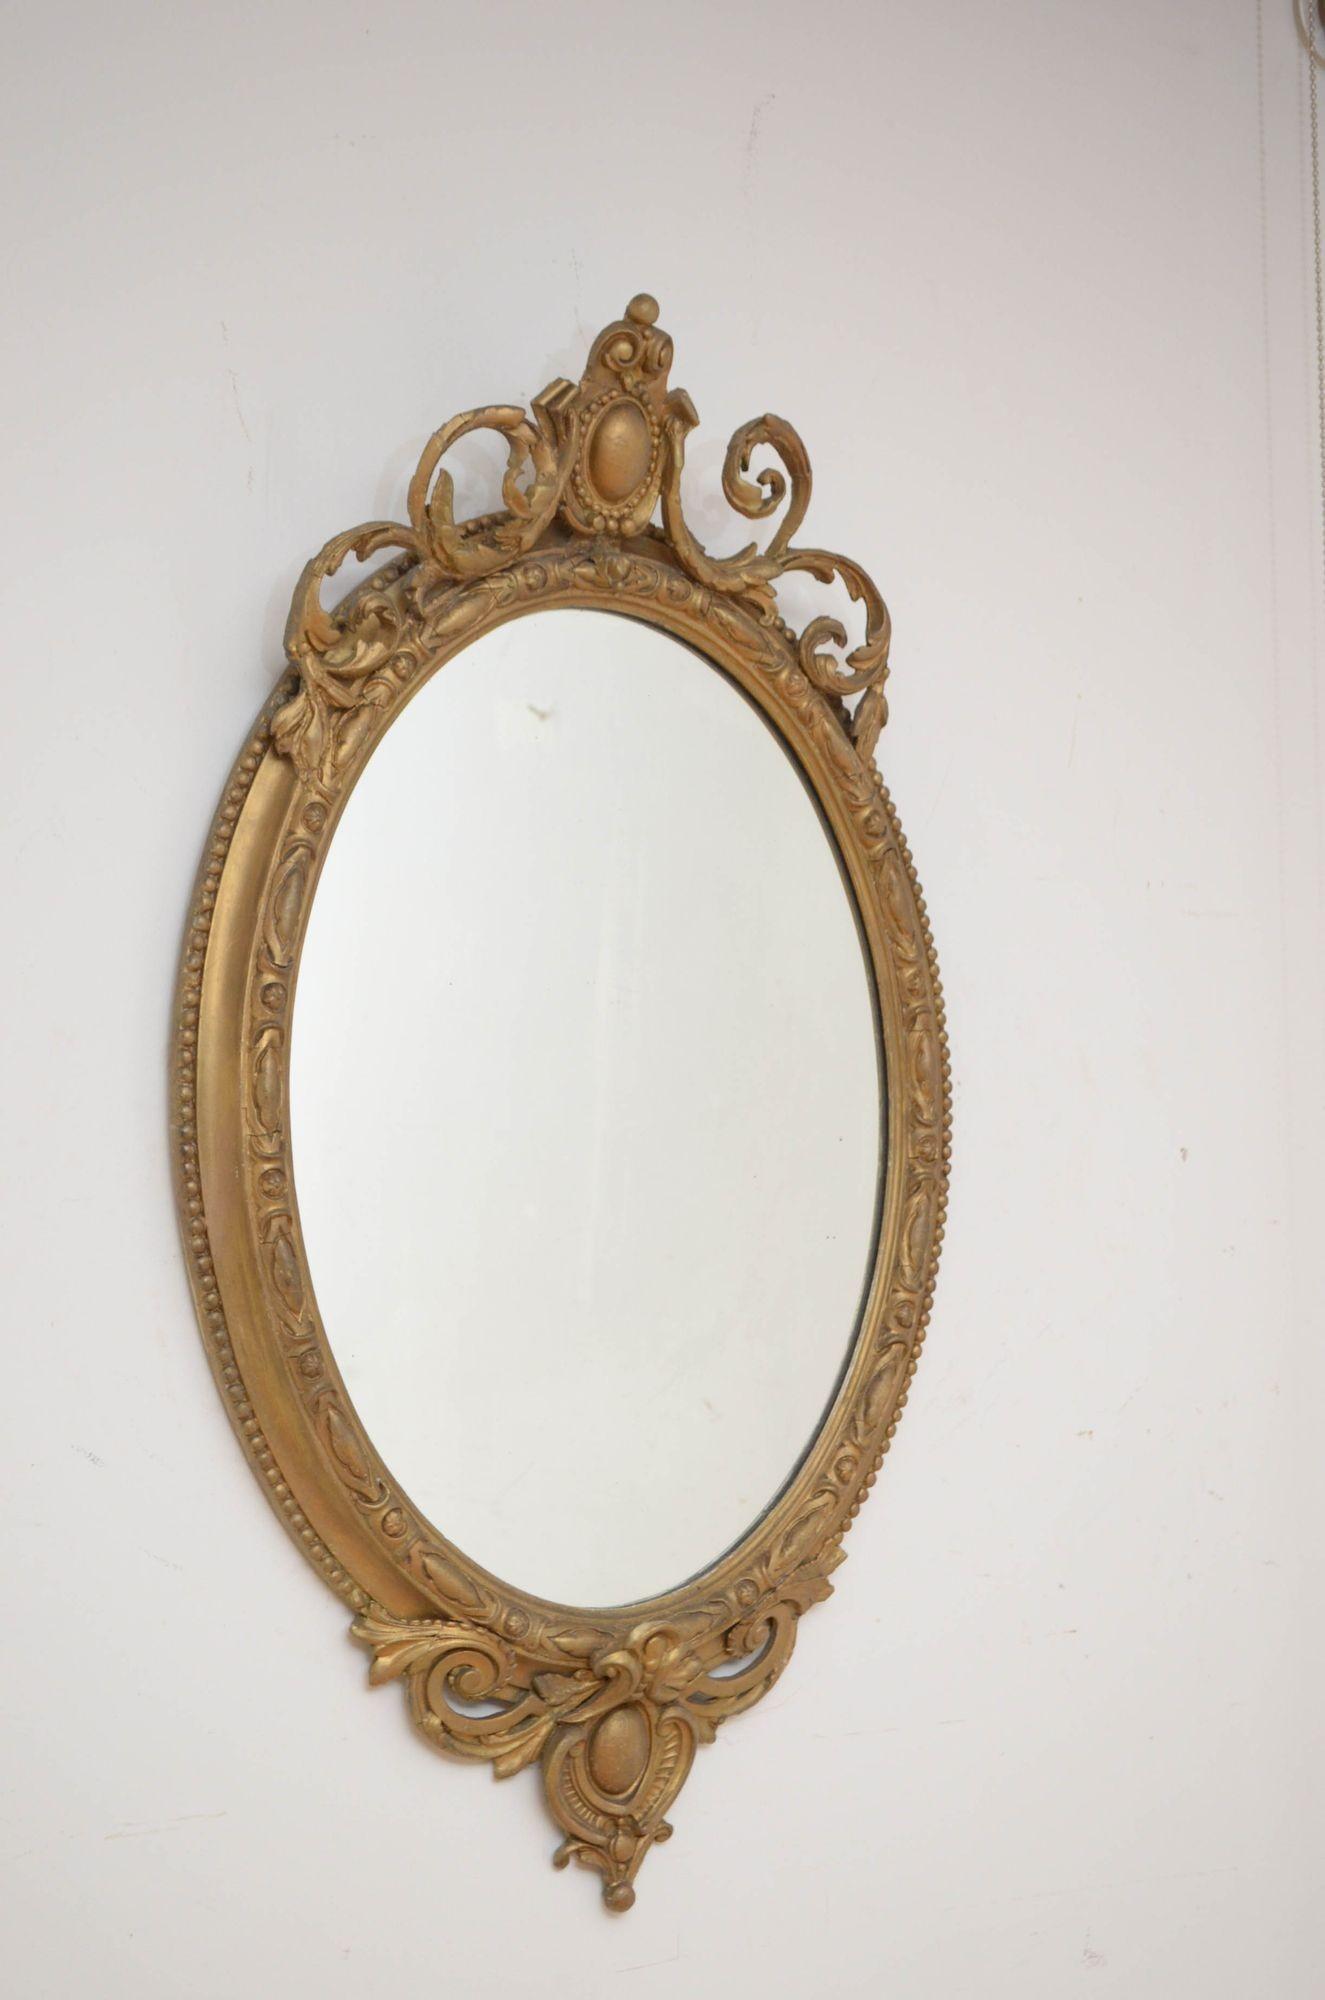 Sn5393 Victorian gilded wall mirror of oval form having original glass with minor imperfections in carved gilded frame with shaped crest to the base and top. This antique mirror has been refinished in gilt paste and is in home ready condition.